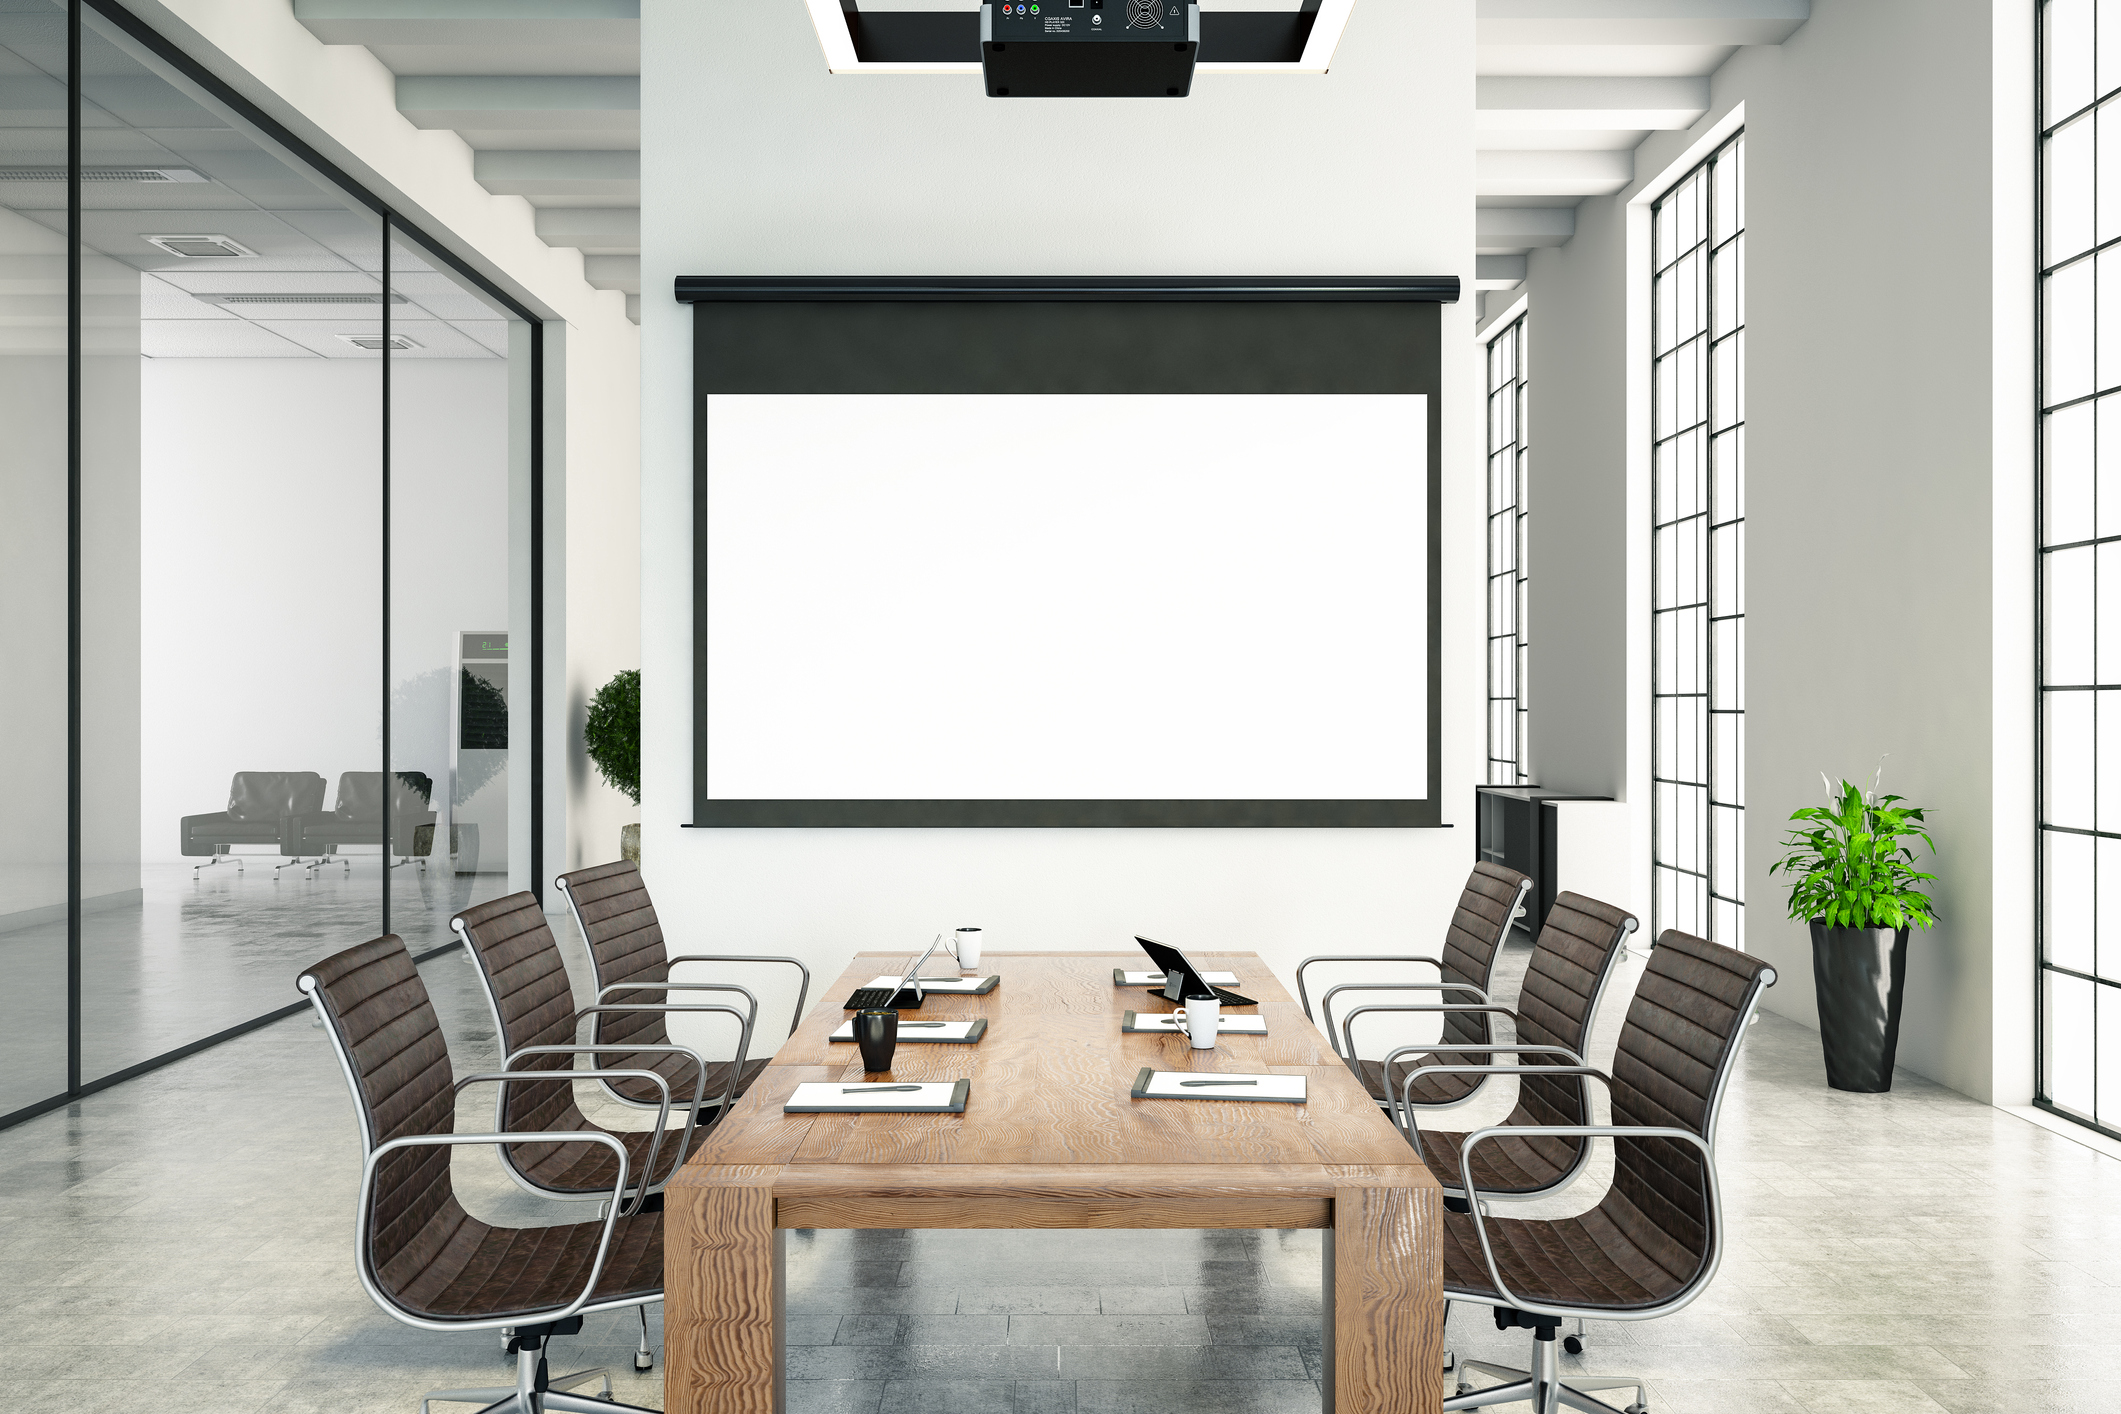 Board Room with Blank Projection Screen